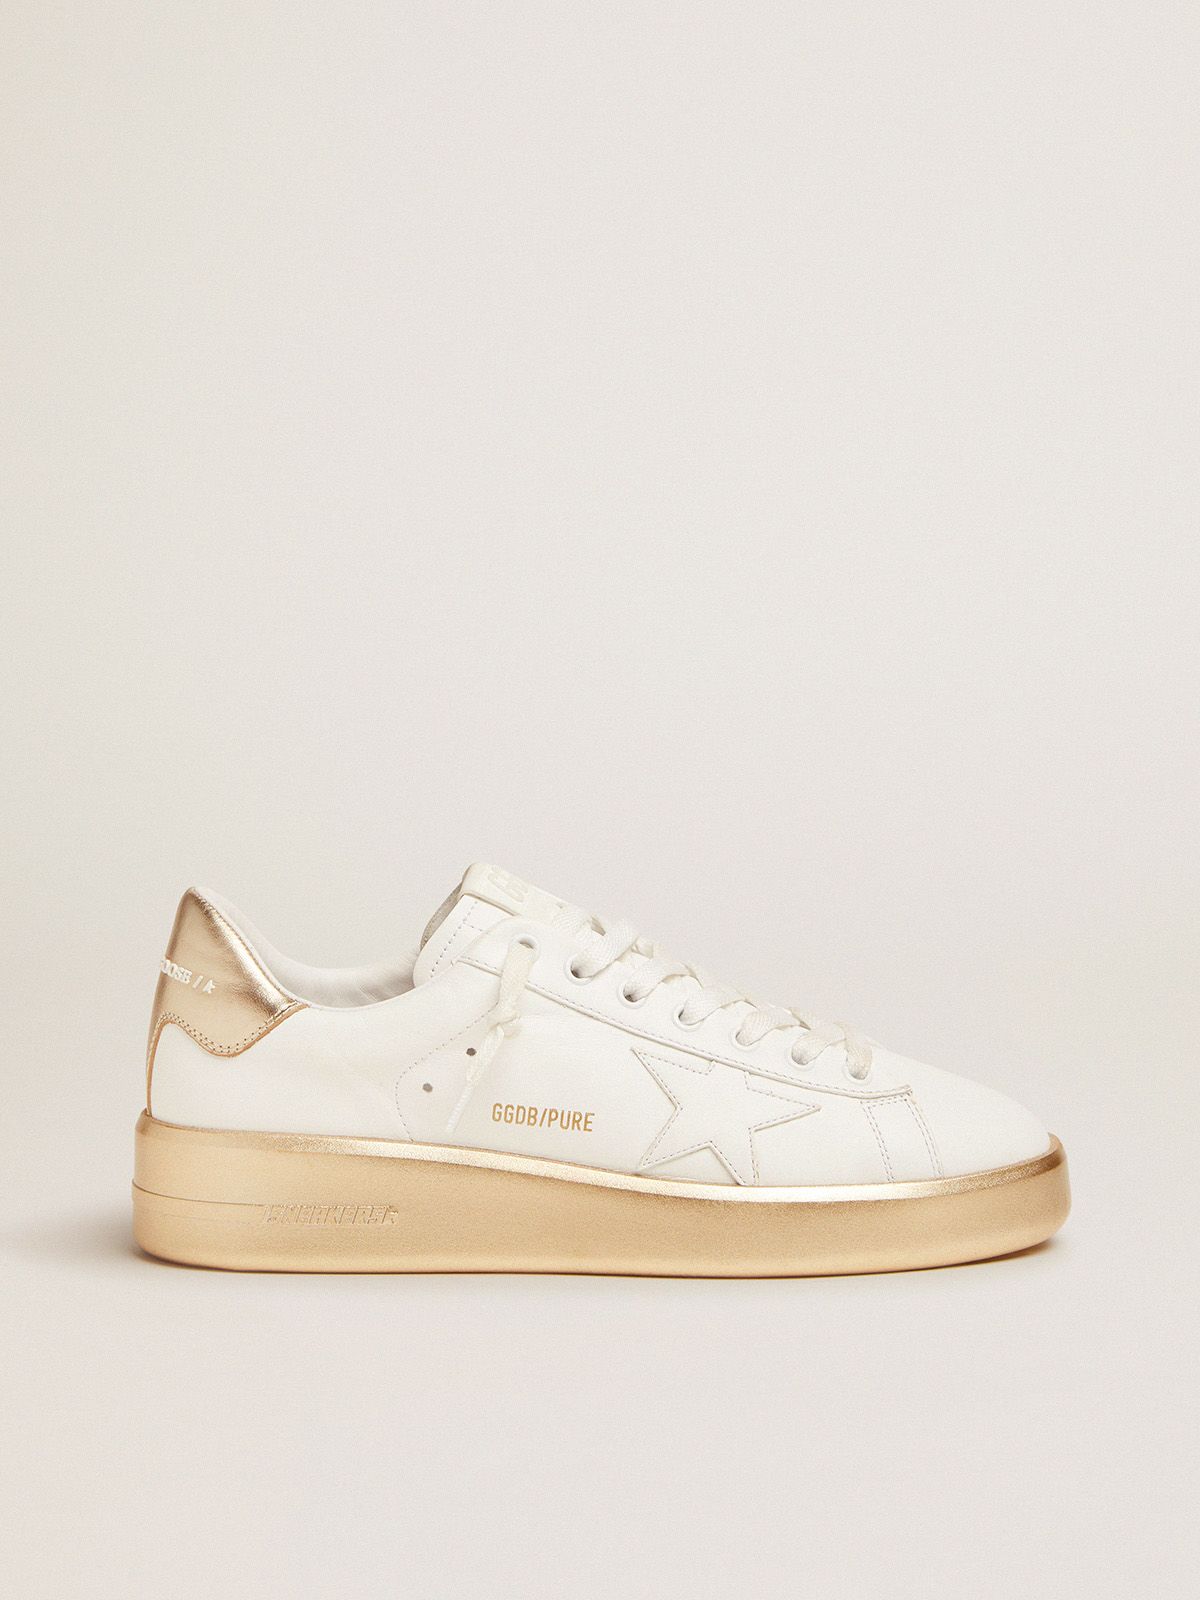 Purestar sneakers in white leather with foxing and gold laminated leather heel tab